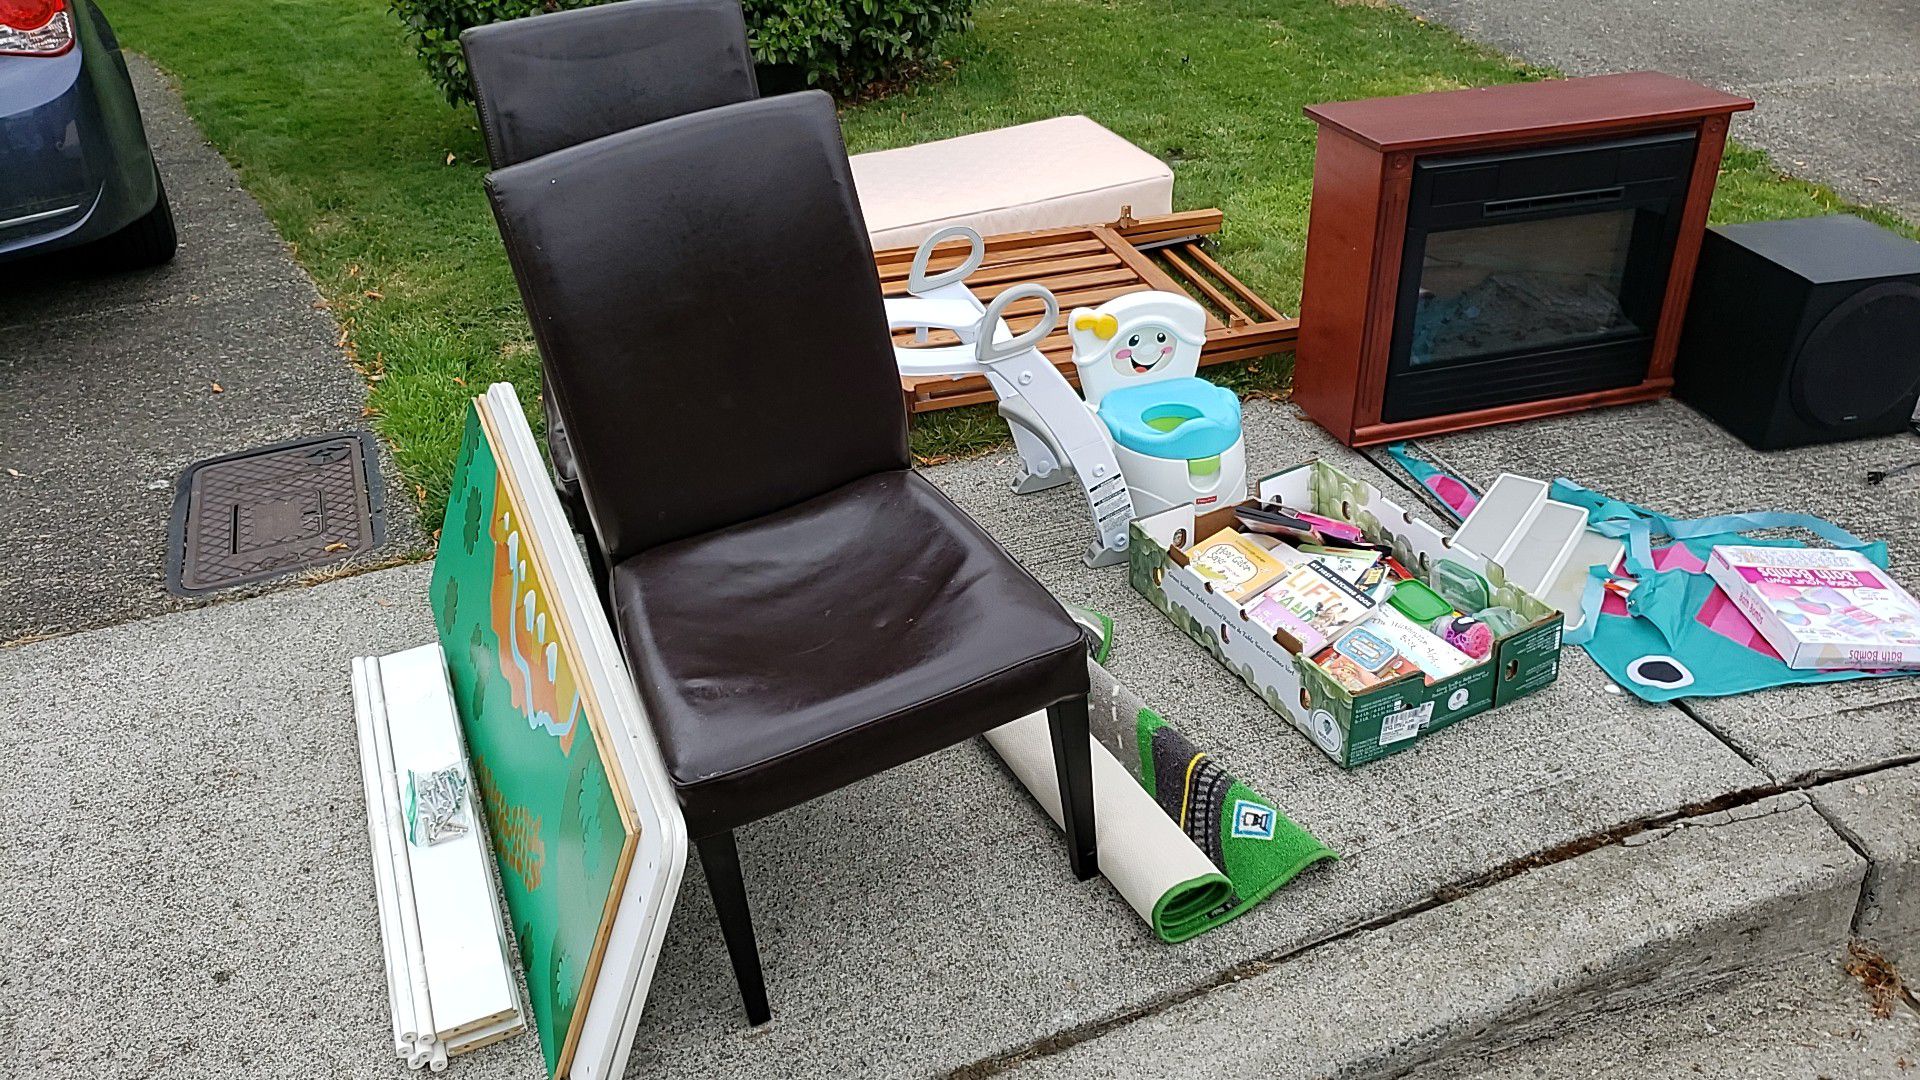 **Free items** crib with mattress, play table, electric fireplace, subwoofer, kids items.